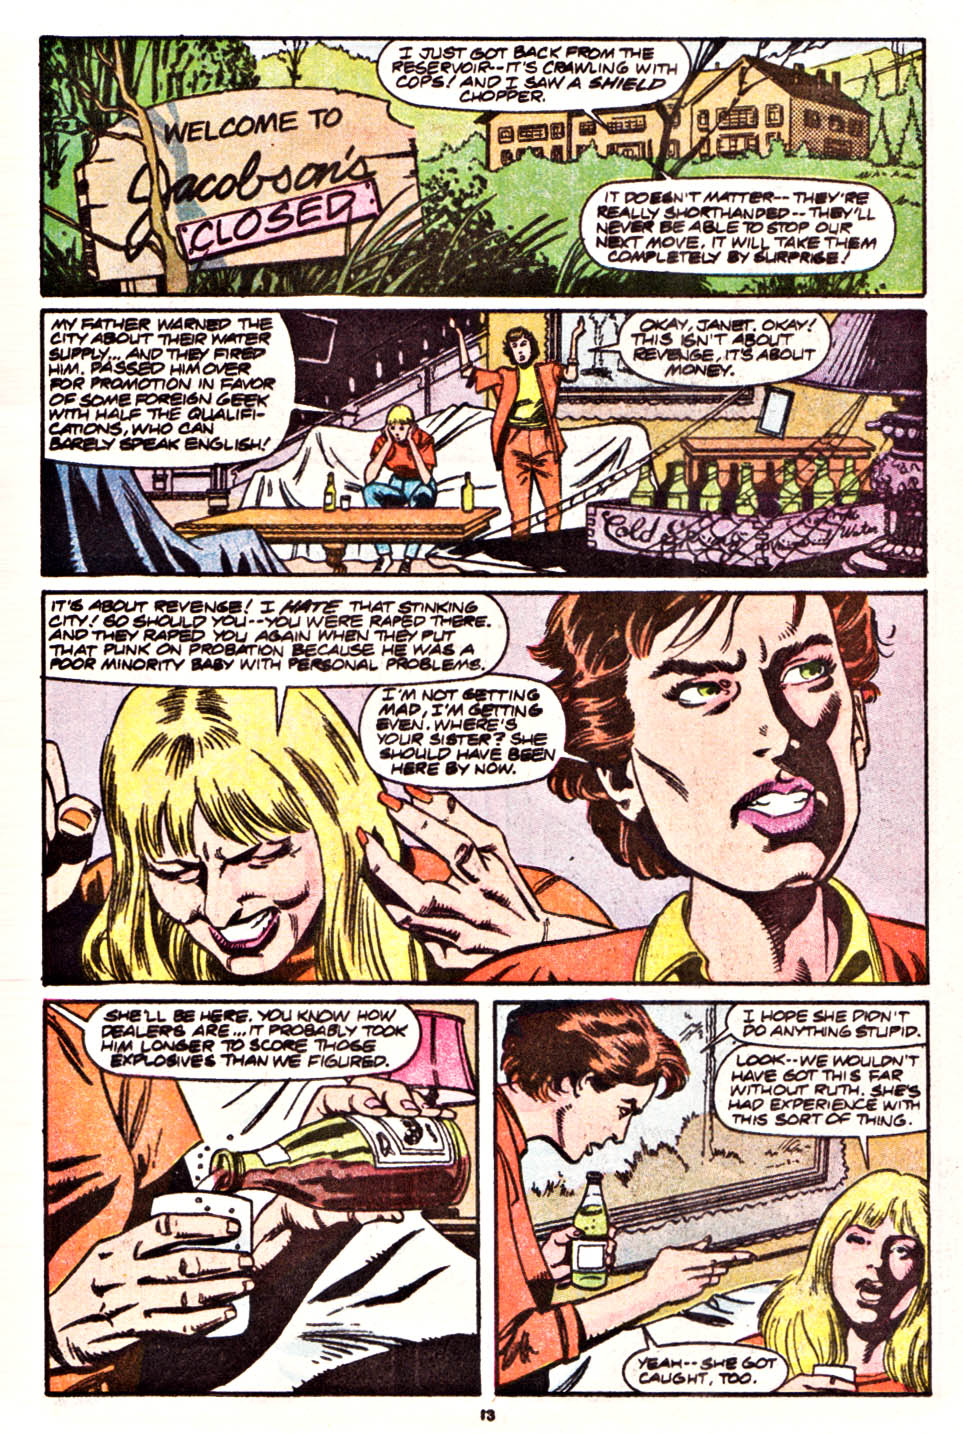 The Punisher (1987) issue 41 - Should a Gentleman offer a Tiparillo to a Lady - Page 11